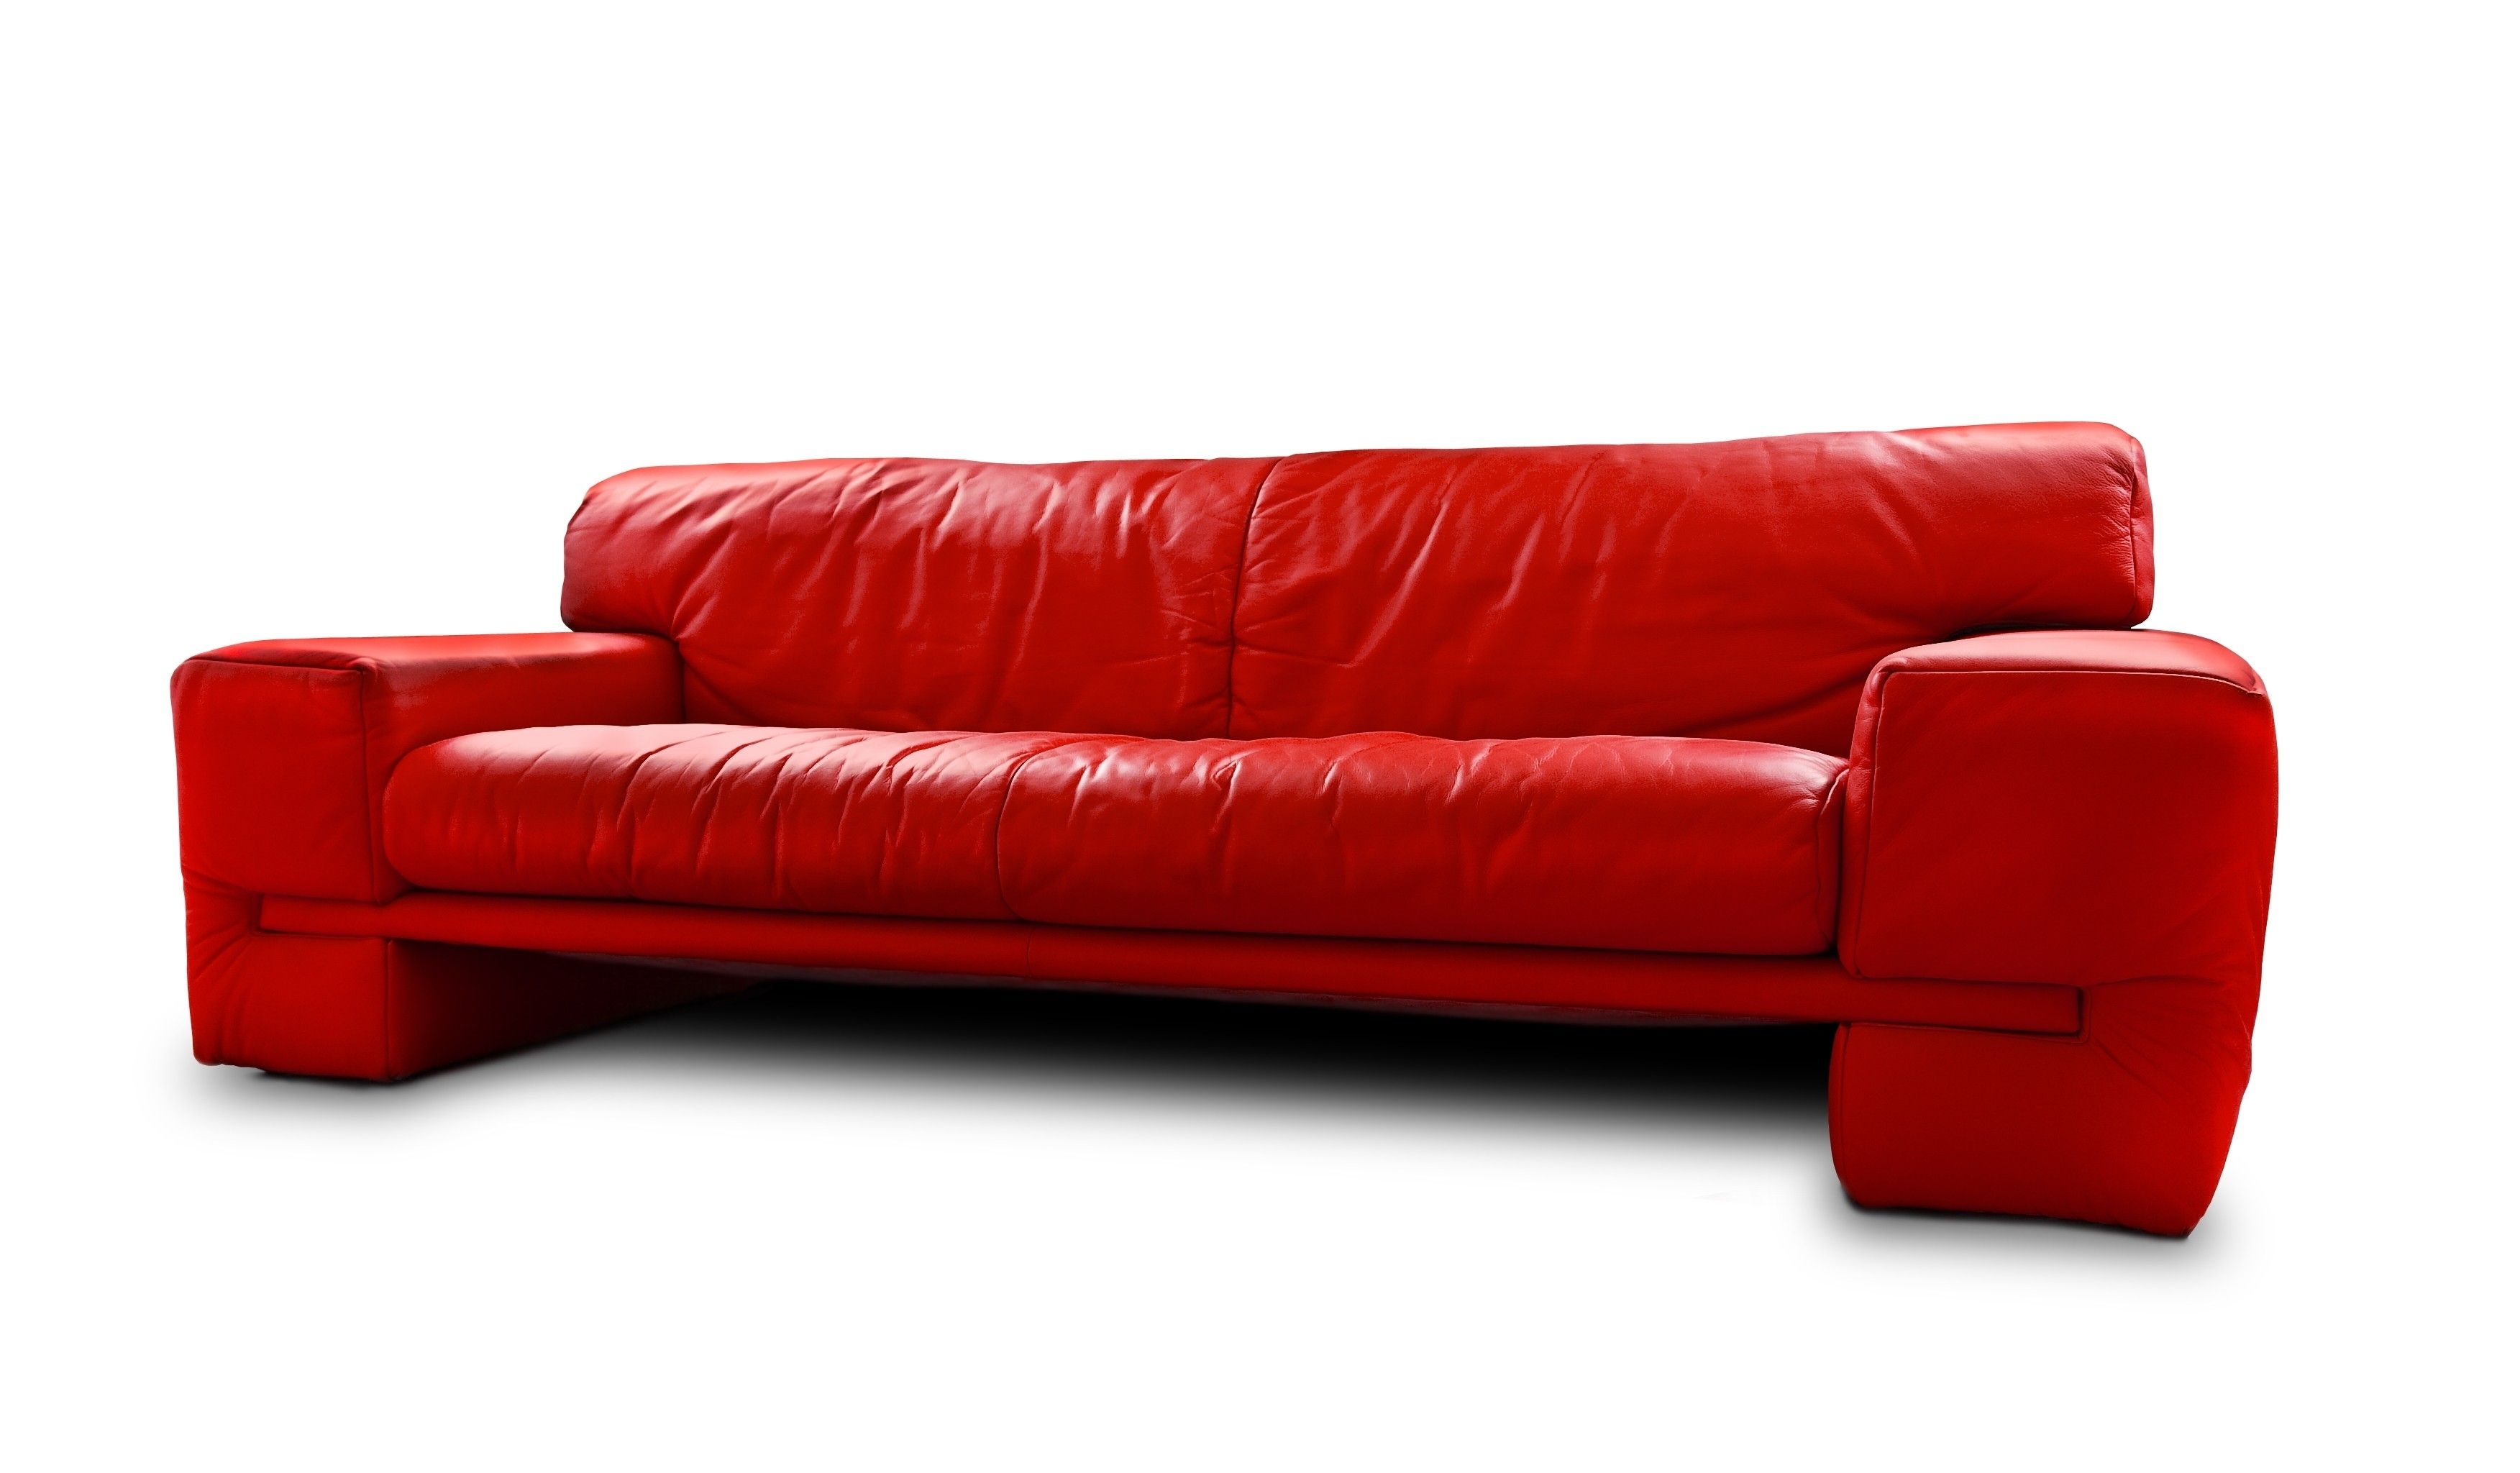 Captivating Red Leather Sleeper Sofa Cool Home Furniture Ideas With Throughout Red Sleeper Sofas (View 7 of 10)